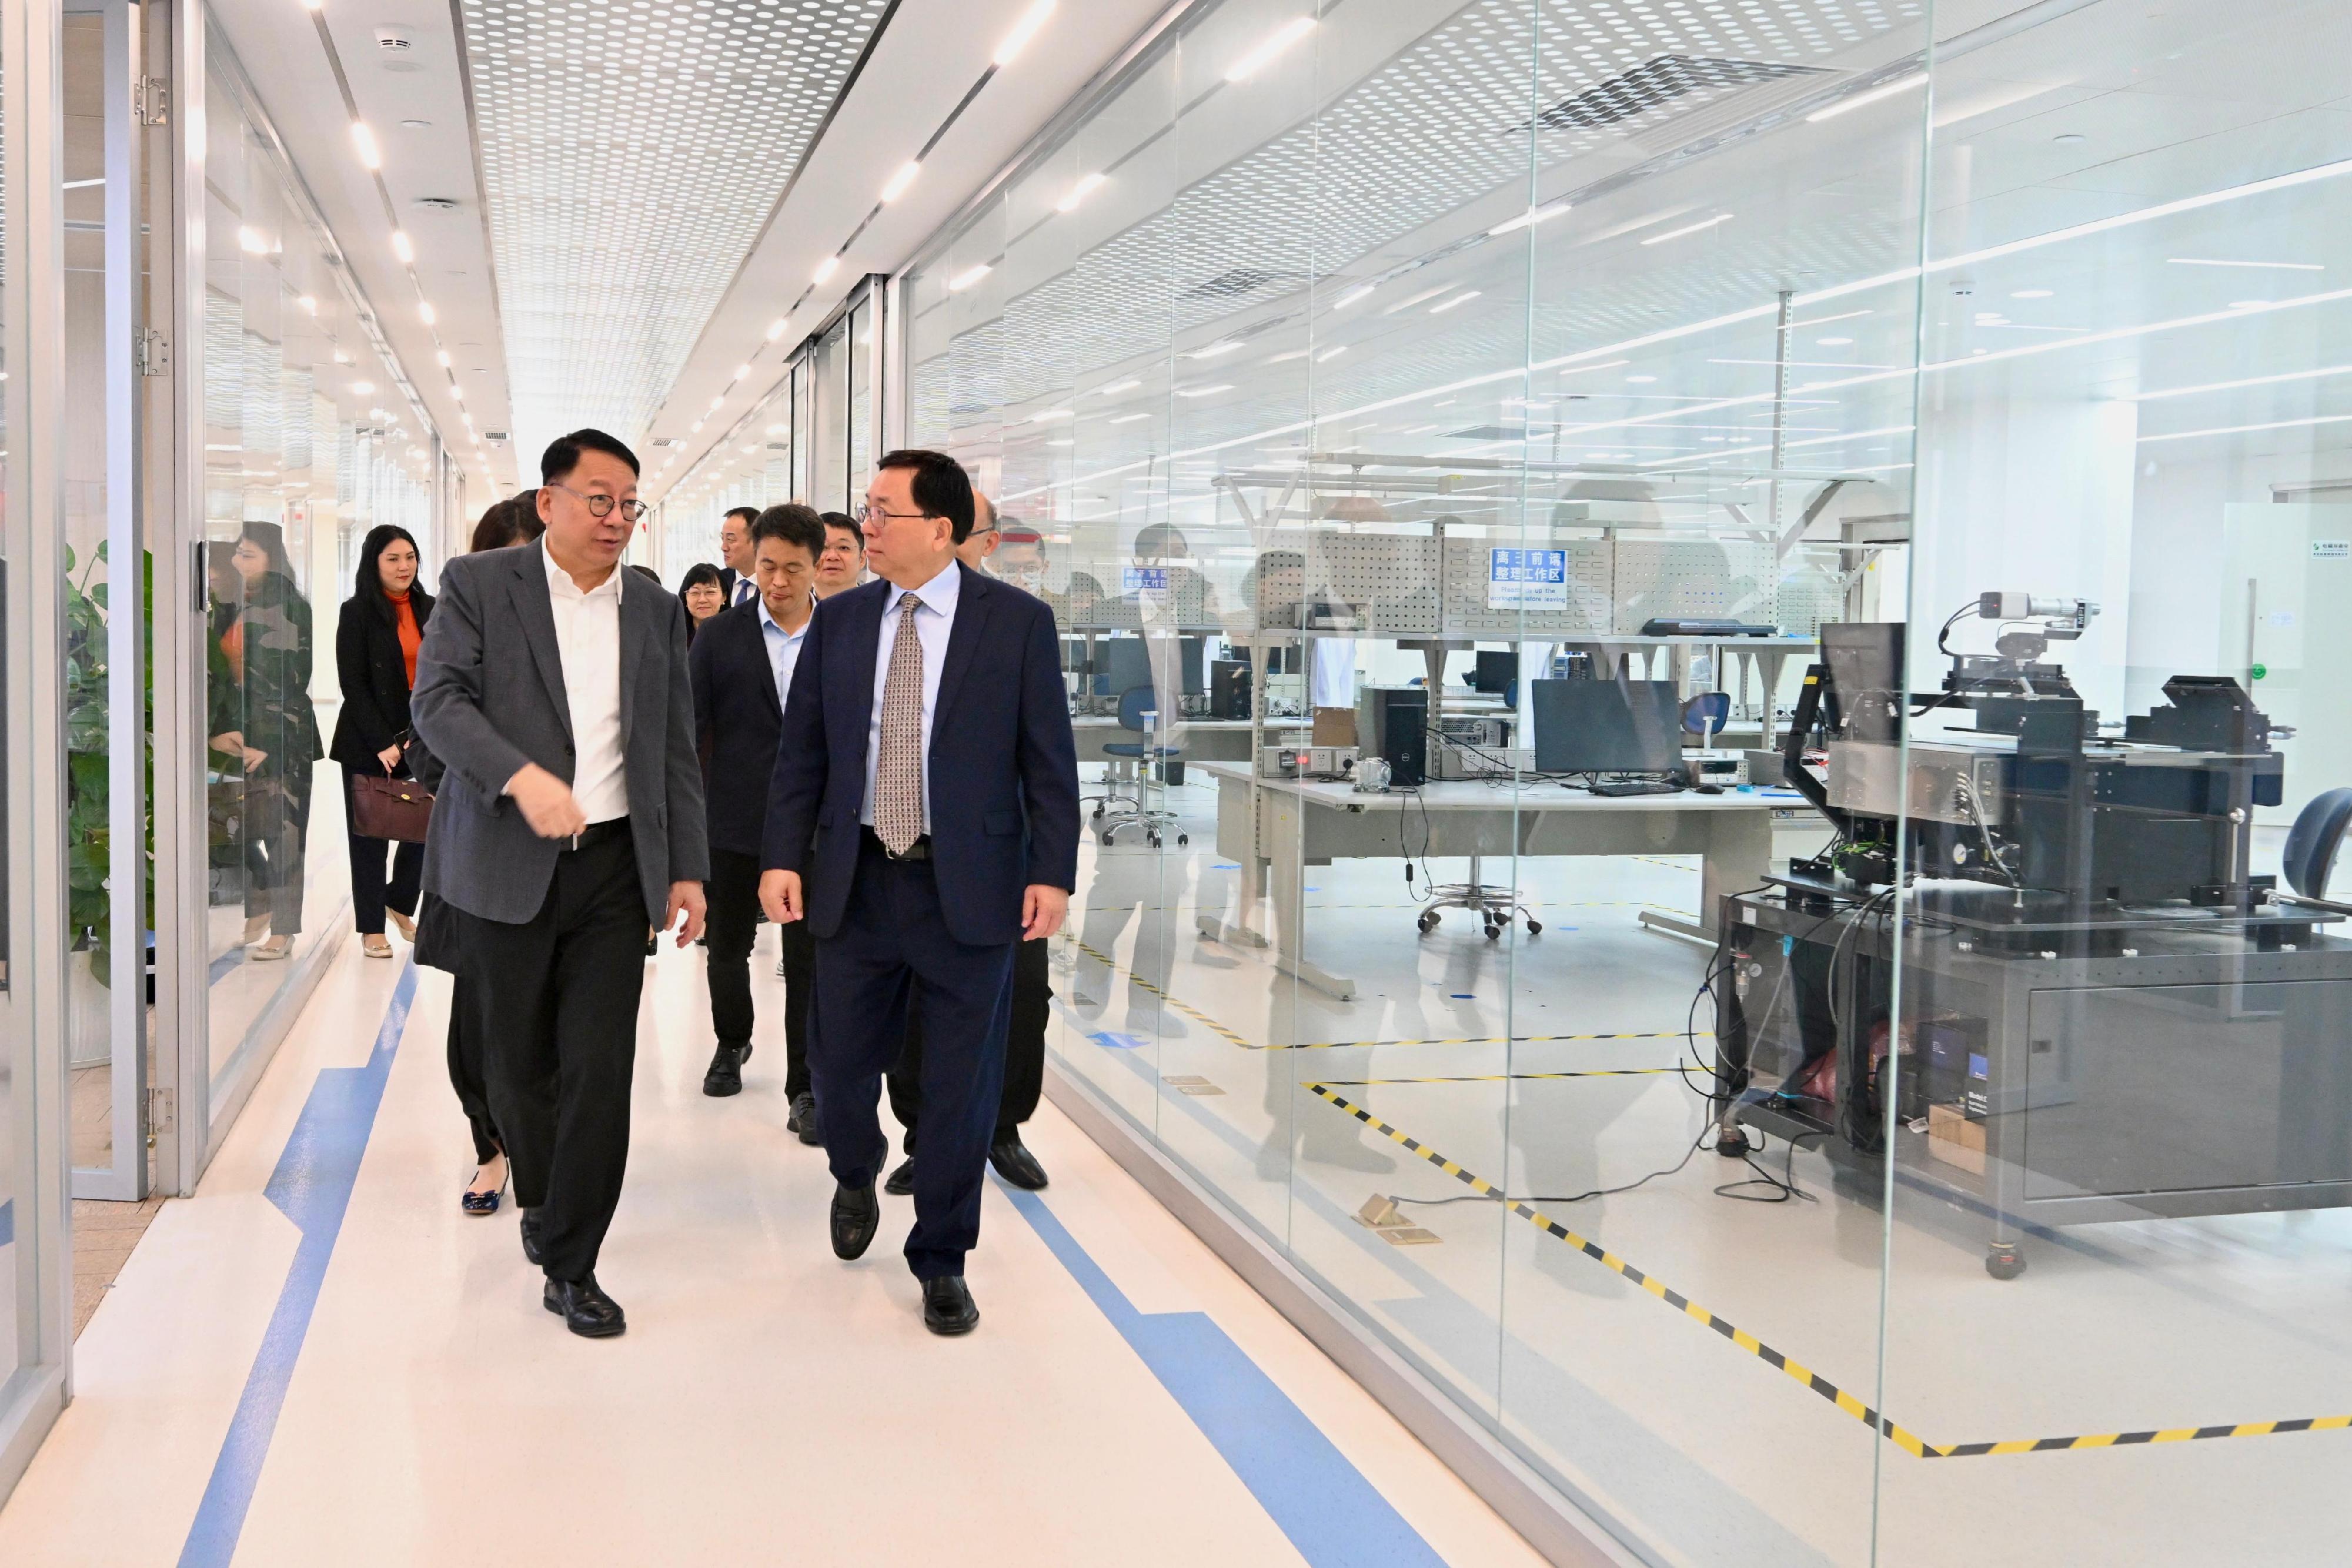 The Chief Secretary for Administration, Mr Chan Kwok-ki, continued his visit to Mainland cities of the Guangdong-Hong Kong-Macao Greater Bay Area in Guangzhou and Huizhou today (January 9). Photo shows Mr Chan (left) touring the Novel IC Exploration Facility at the Hong Kong University of Science and Technology (Guangzhou) in Nansha, Guangzhou. Next to him is the President of the university, Professor Lionel Ni (right).